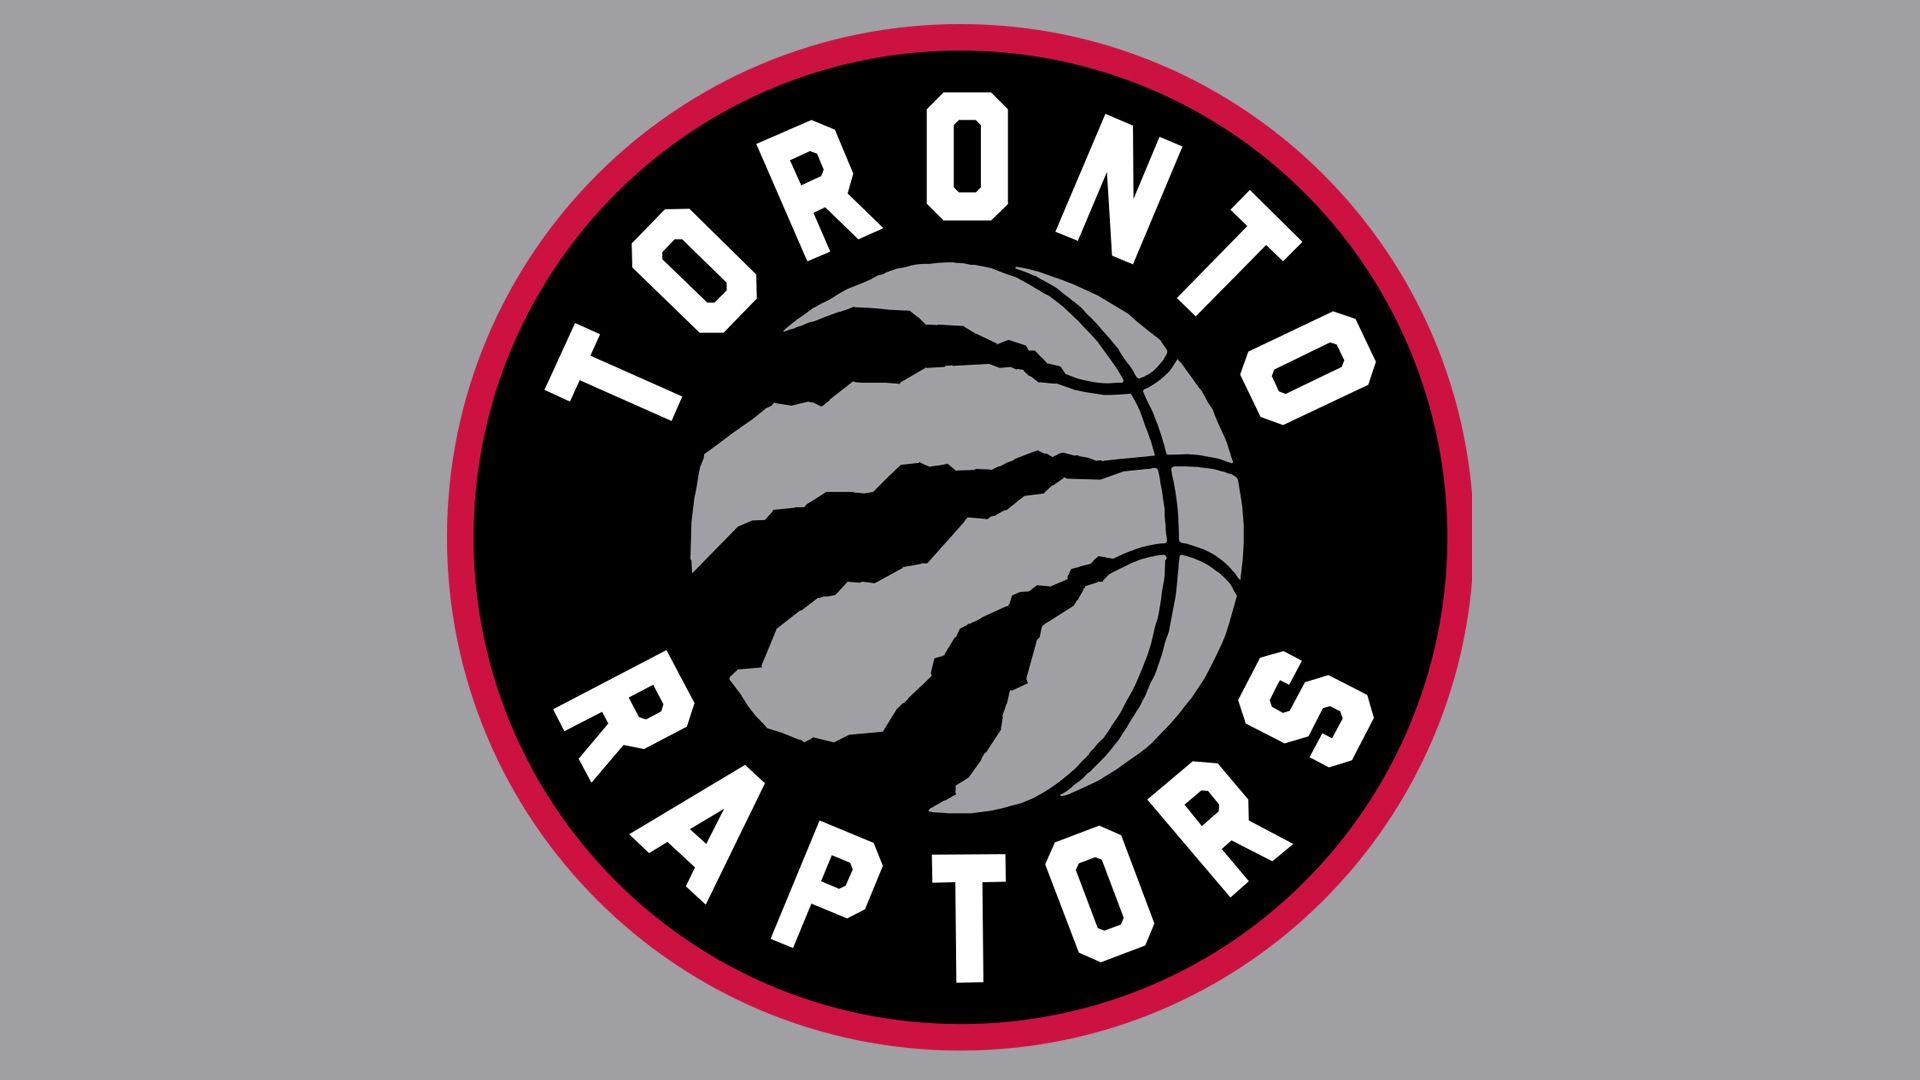 Raptors Logo - Toronto Raptors Logo, Toronto Raptors Symbol, Meaning, History and ...